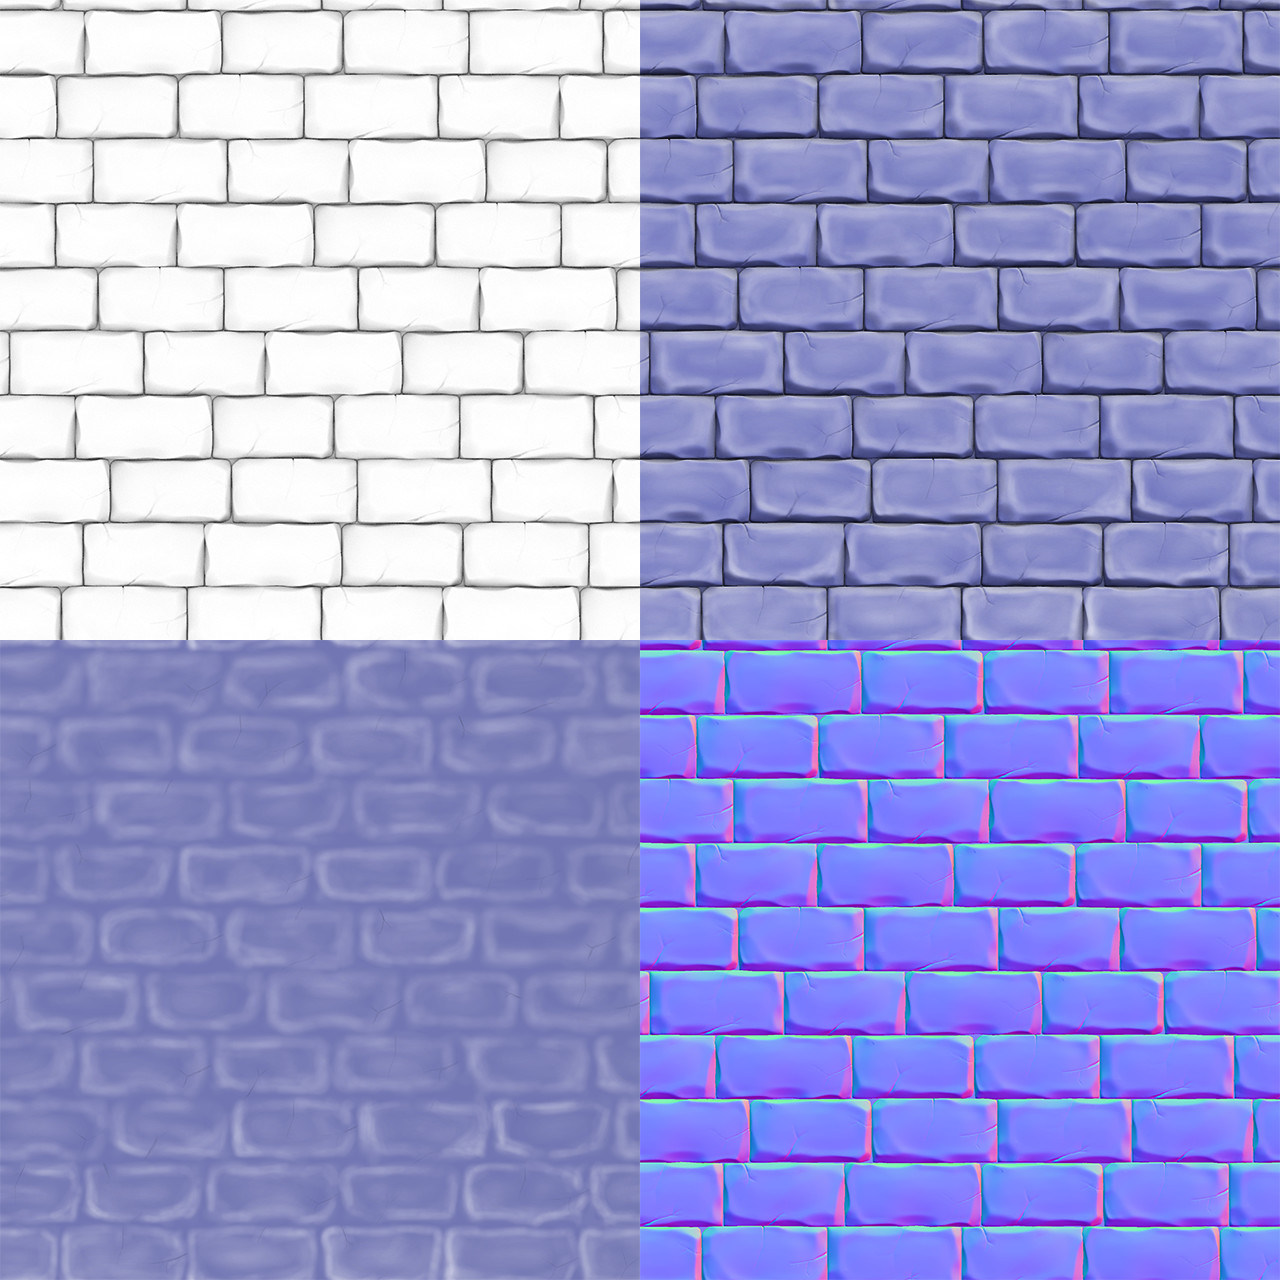 three textures: ambient occlusion, color, normal, and a photoshop mix of all of them